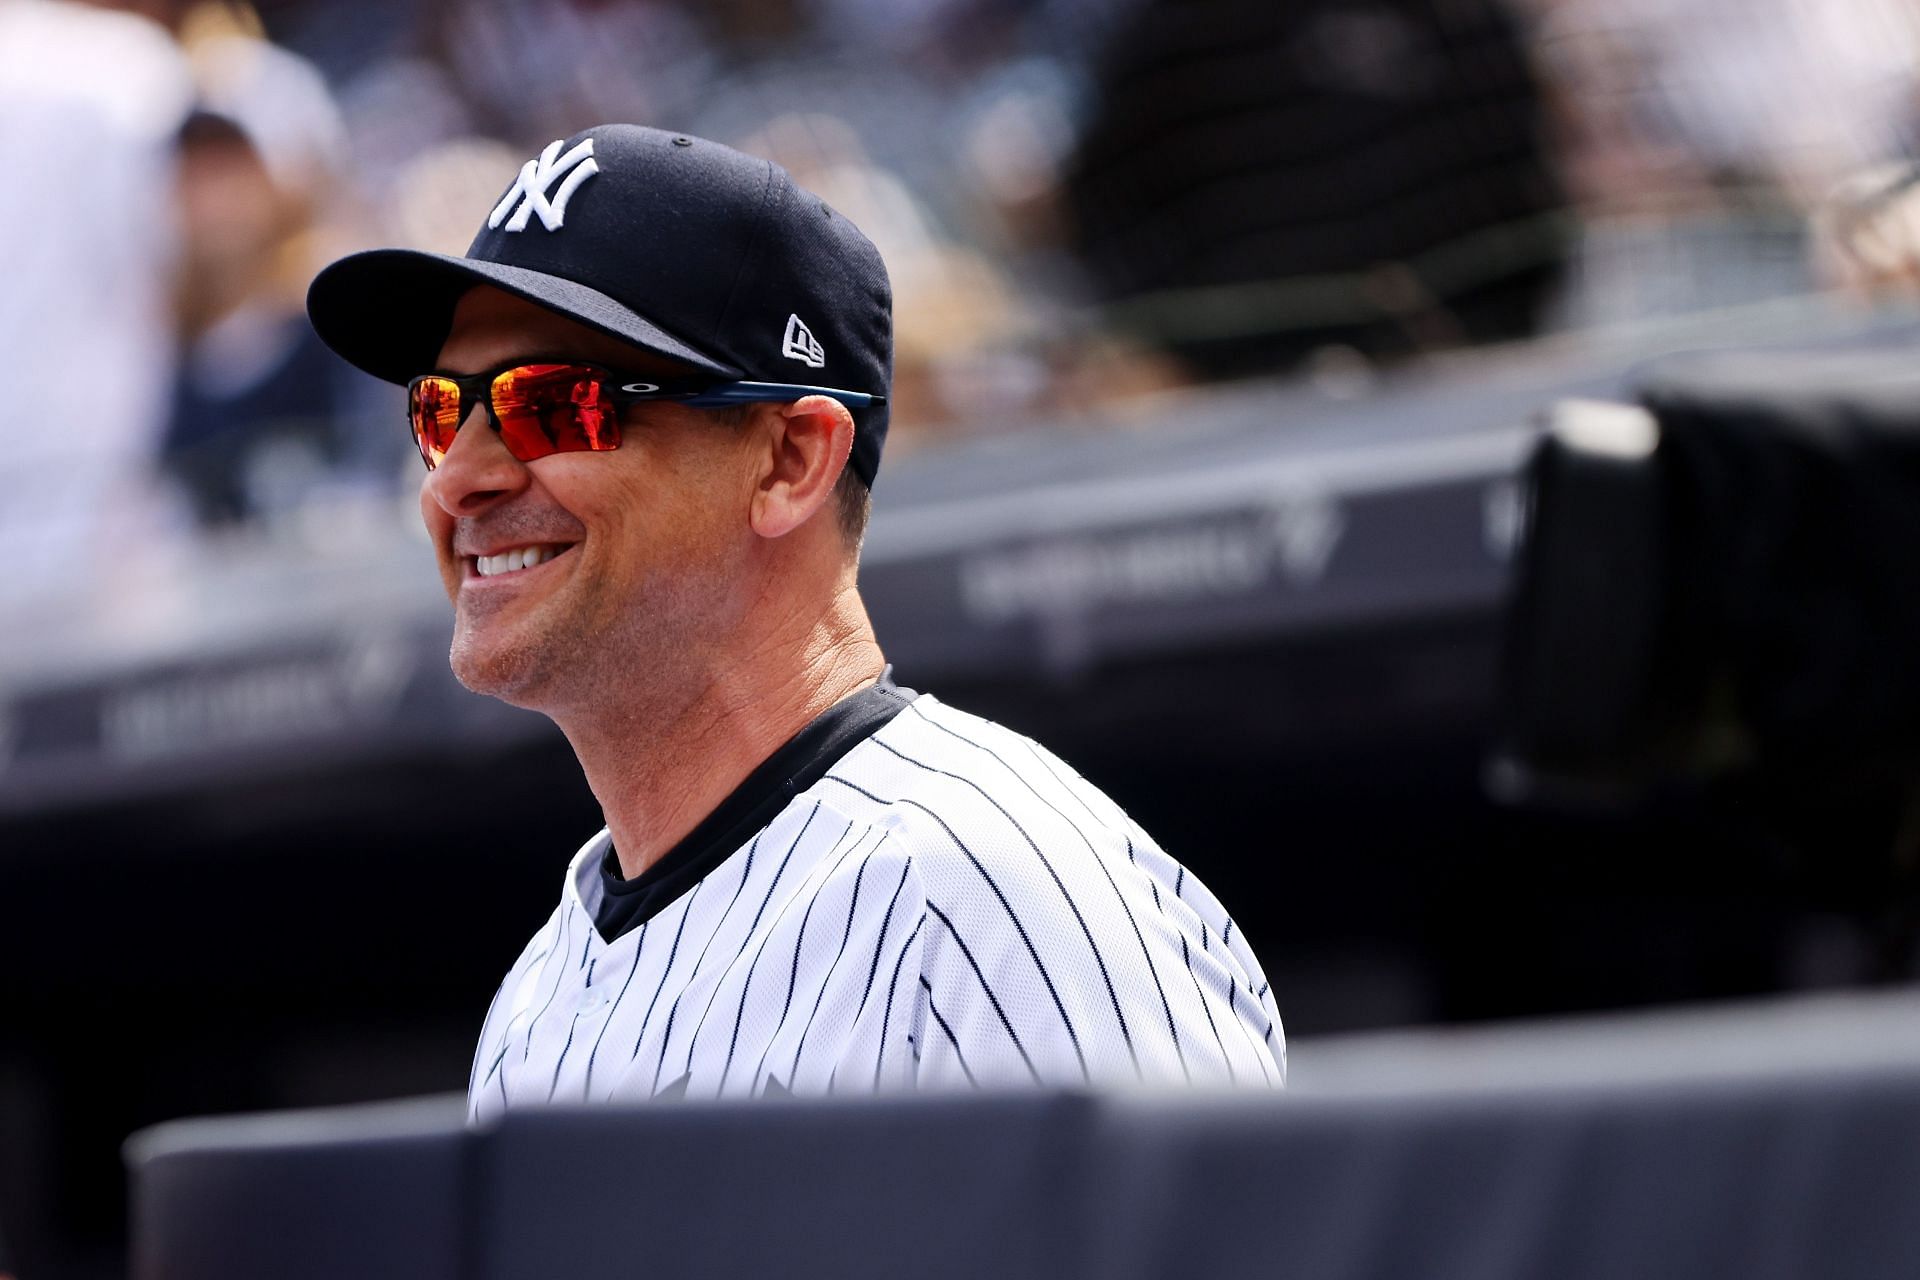 New York Yankees manager Aaron Boone is making the rounds on social media after he dismissed an opposing manager in a display of searing indifference.